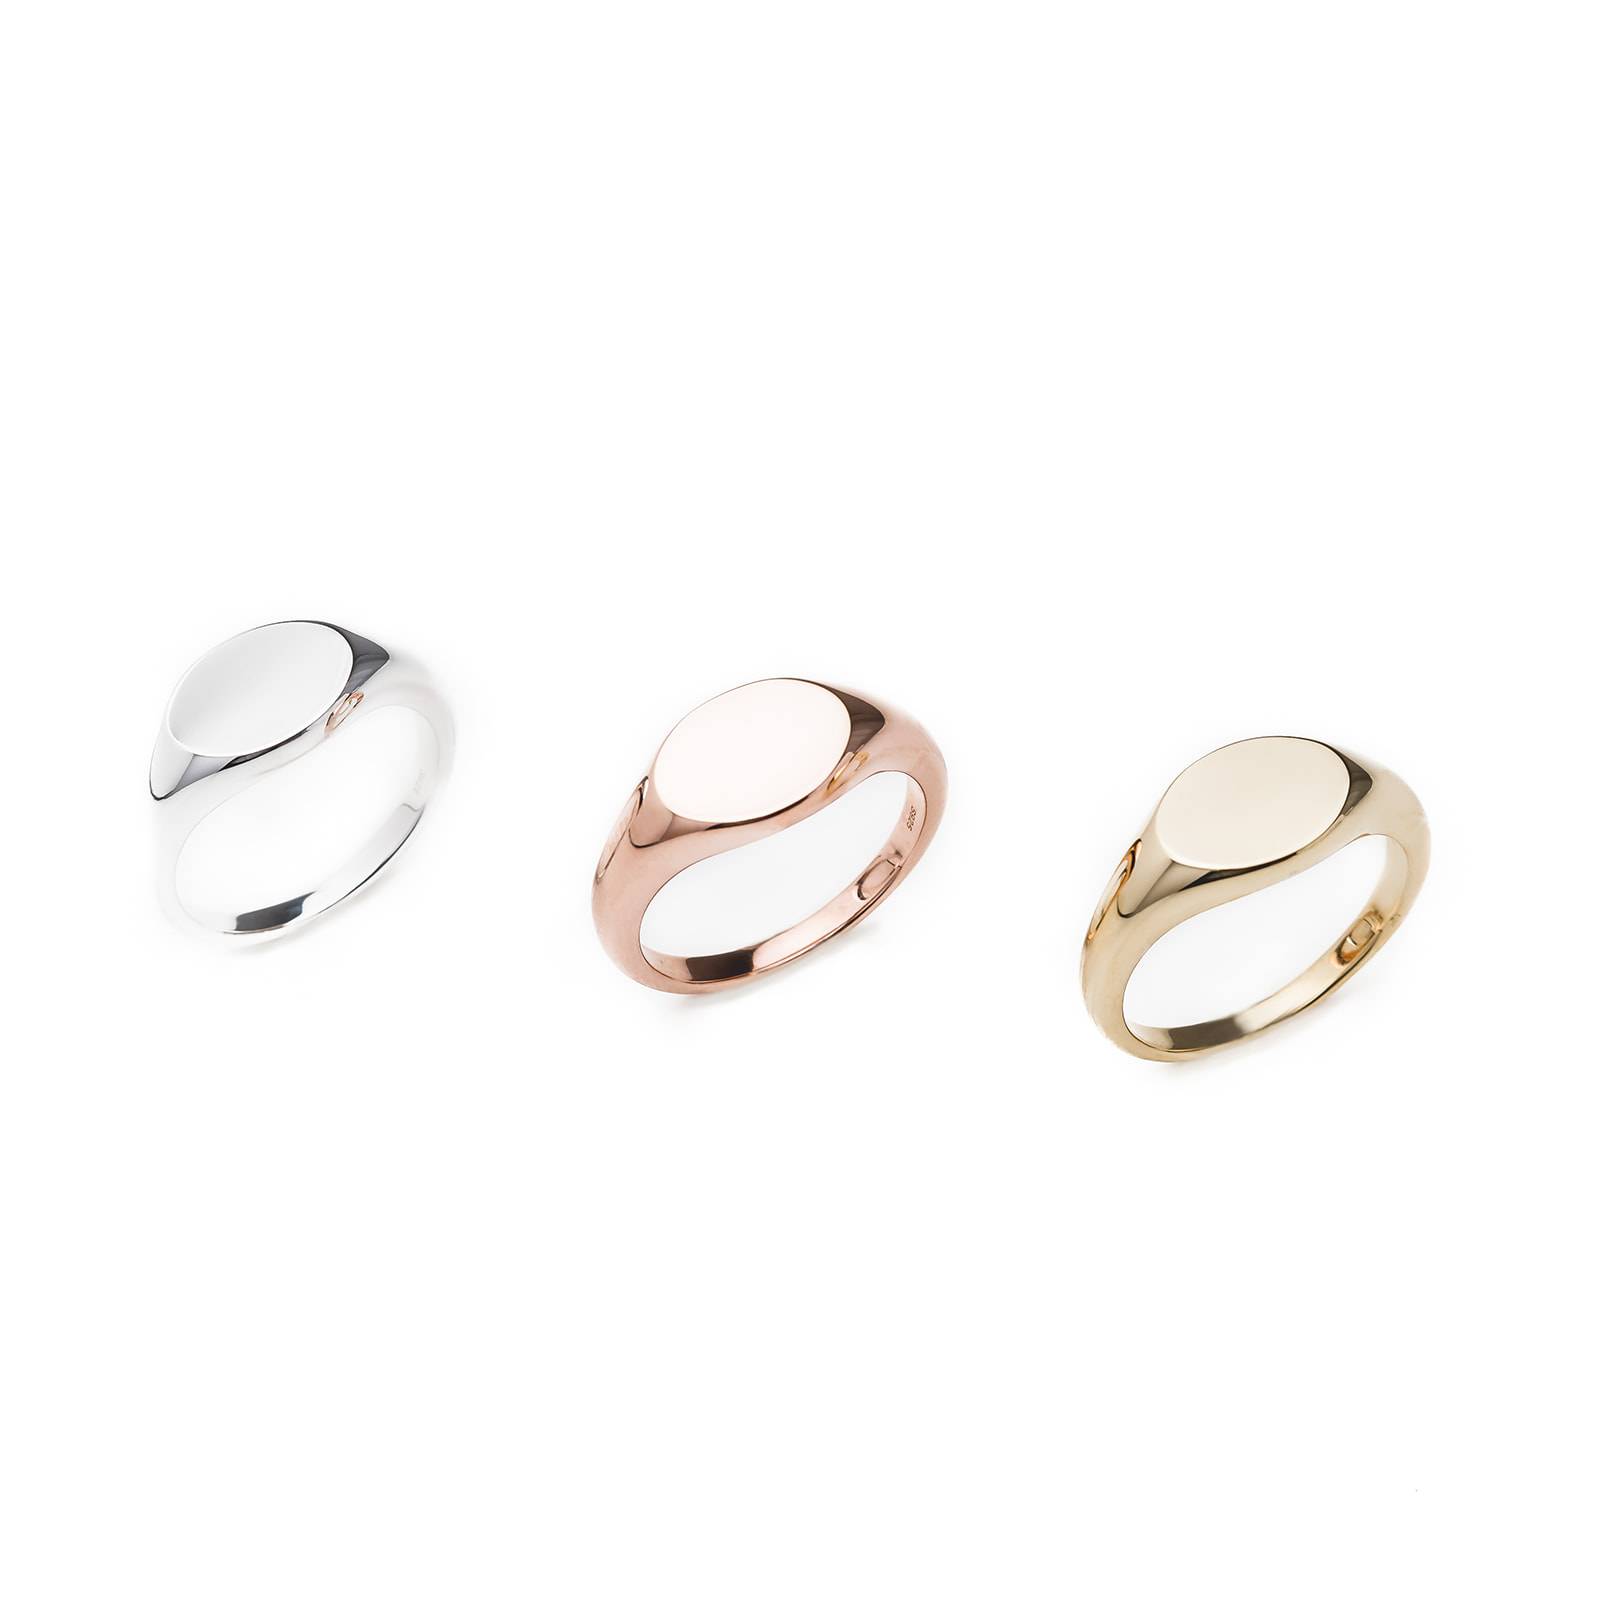 sterling silver, rose gold or yellow gold plated signet rings